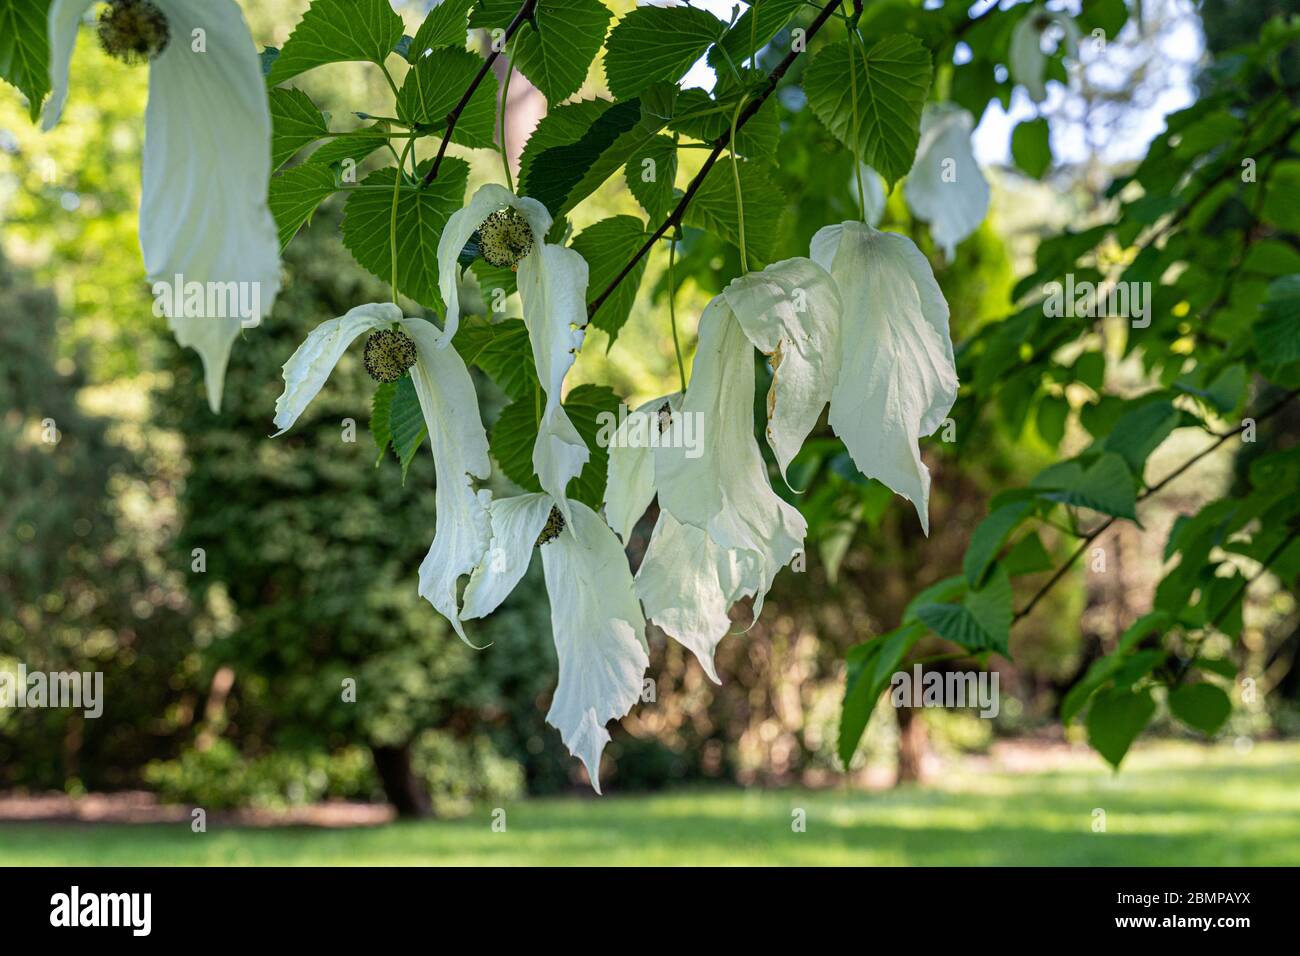 The magnificent handkerchief tree in bloom Stock Photo